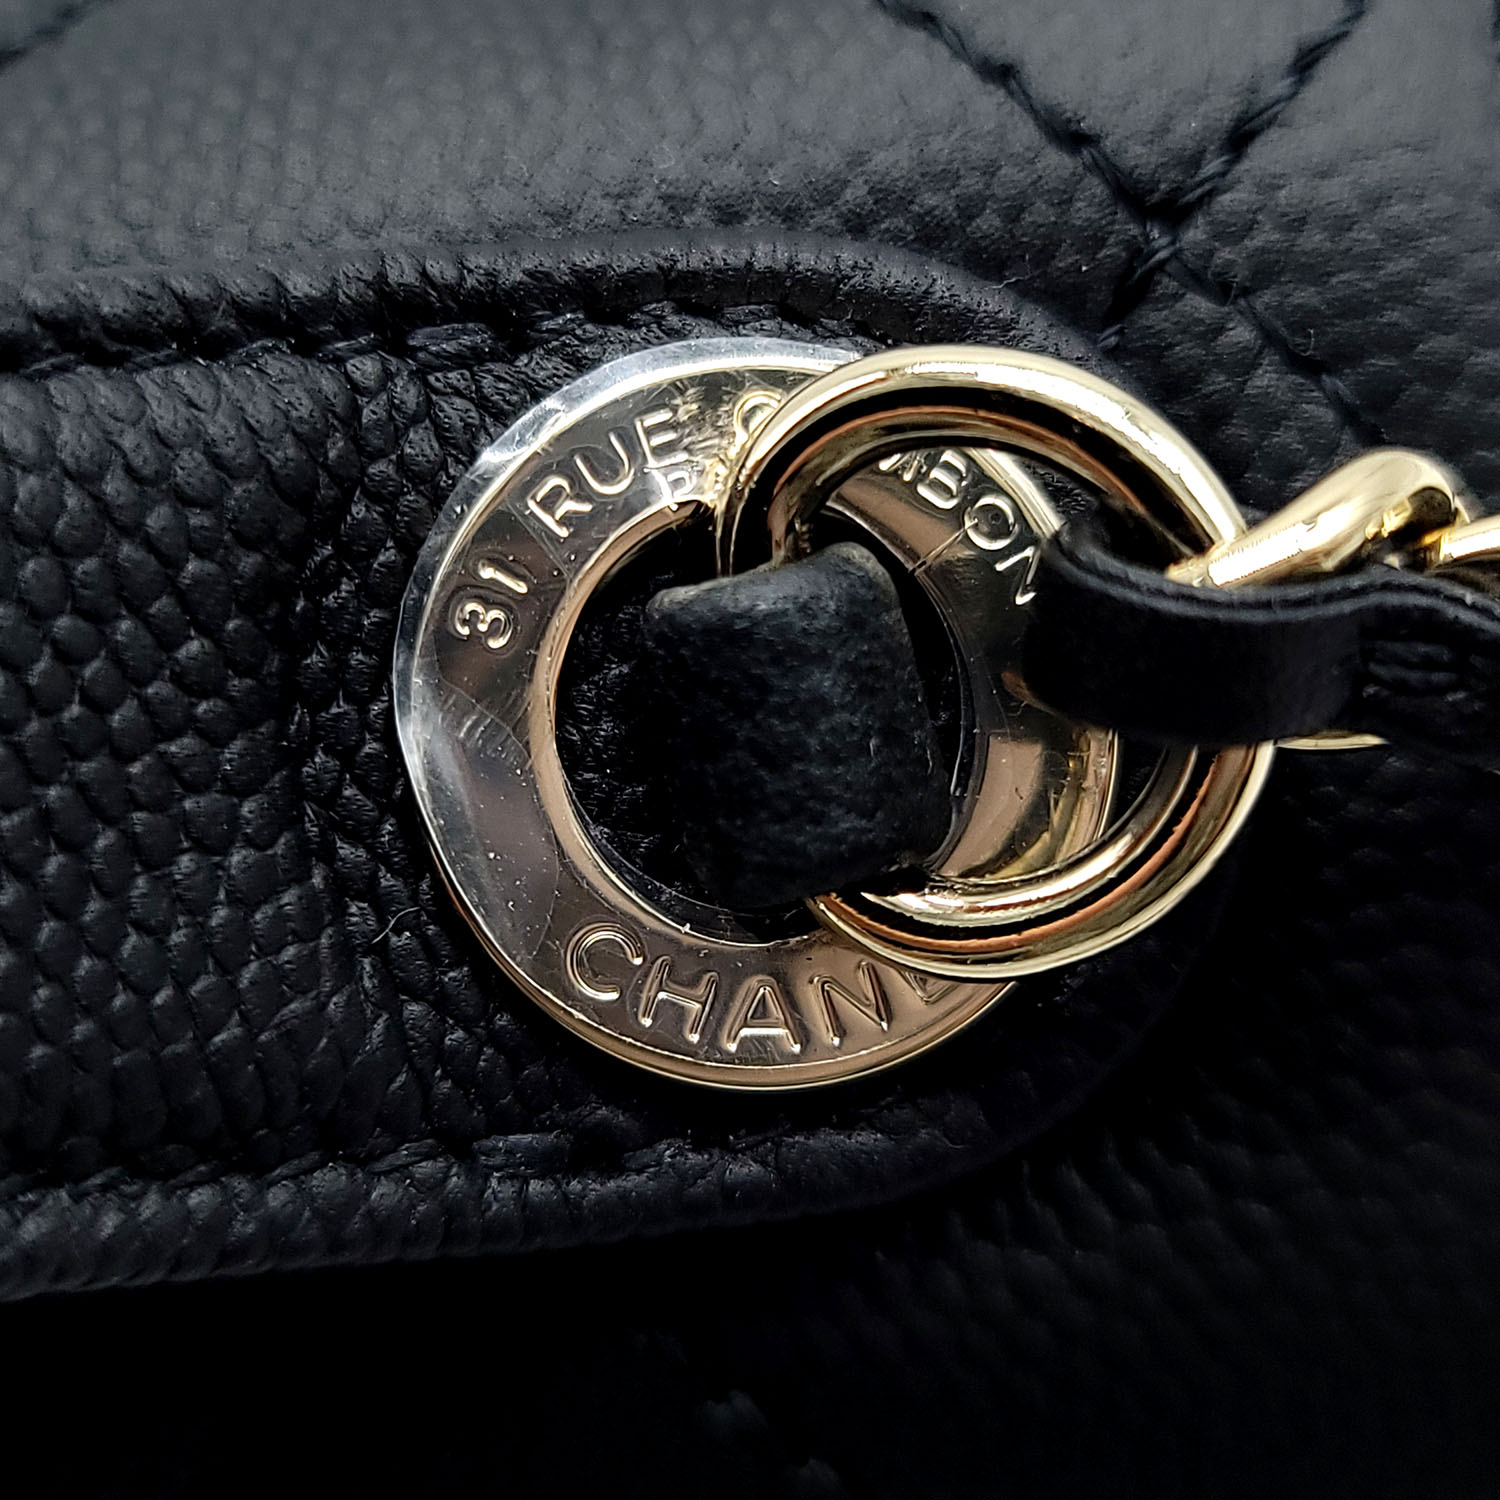 Chanel Small Business Affinity Flap Bag Black – Dr. Runway